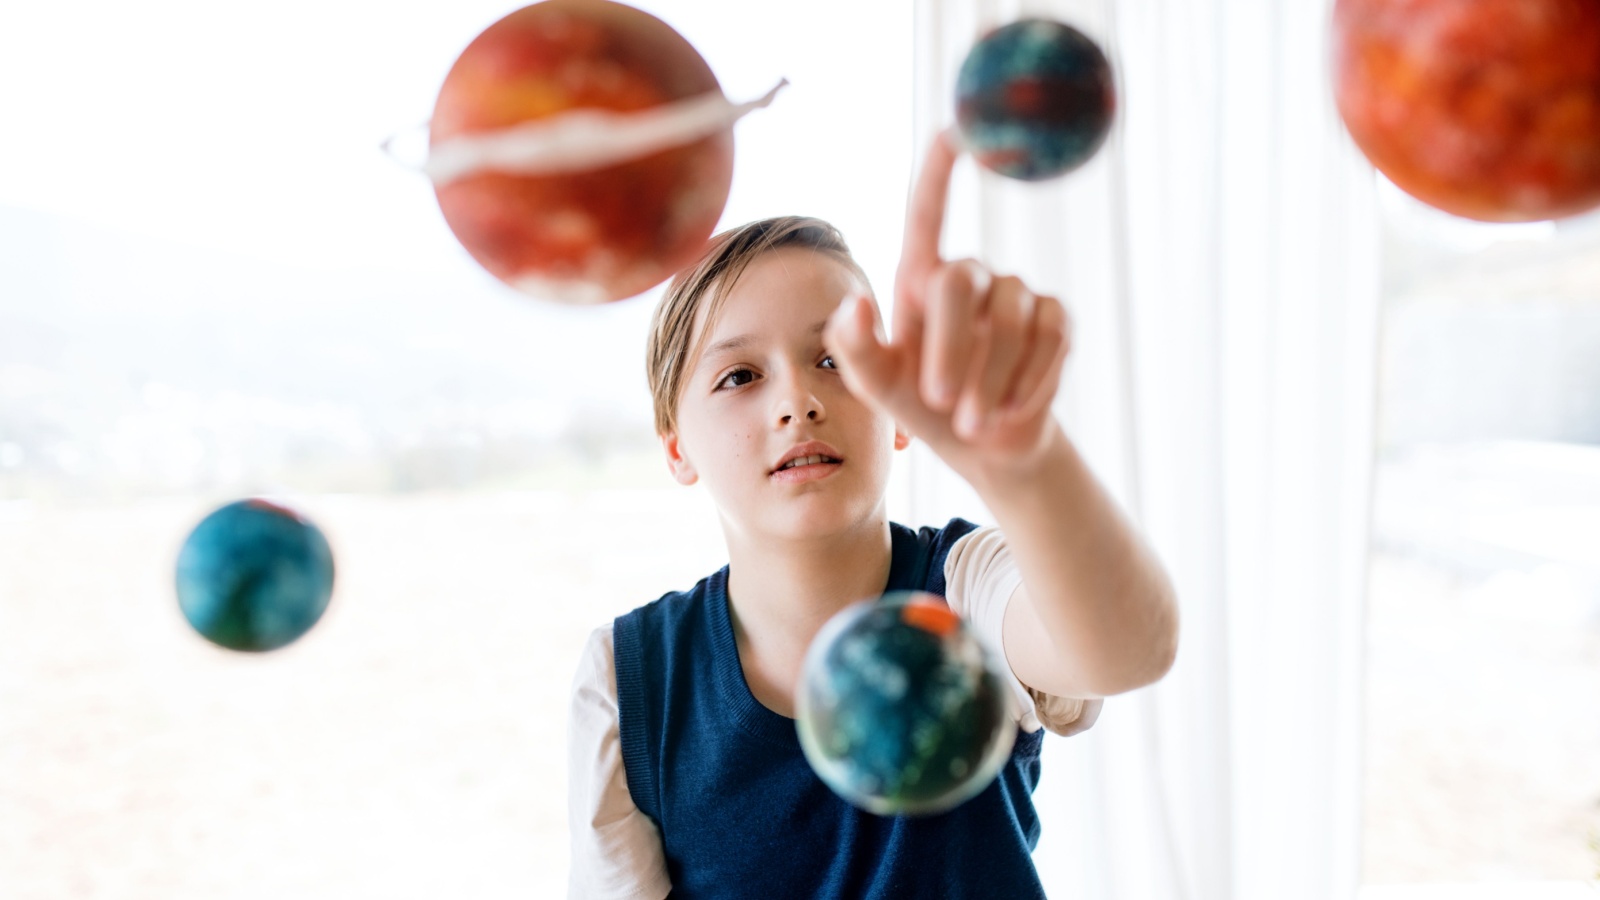 image credit: Ground Picture/Shutterstock <p>Build a scale model of the solar system using balls of different sizes and colors. Place them at appropriate distances to understand the vastness of space. This visual and tactile project reinforces the concept of scale and distance in the universe.</p>